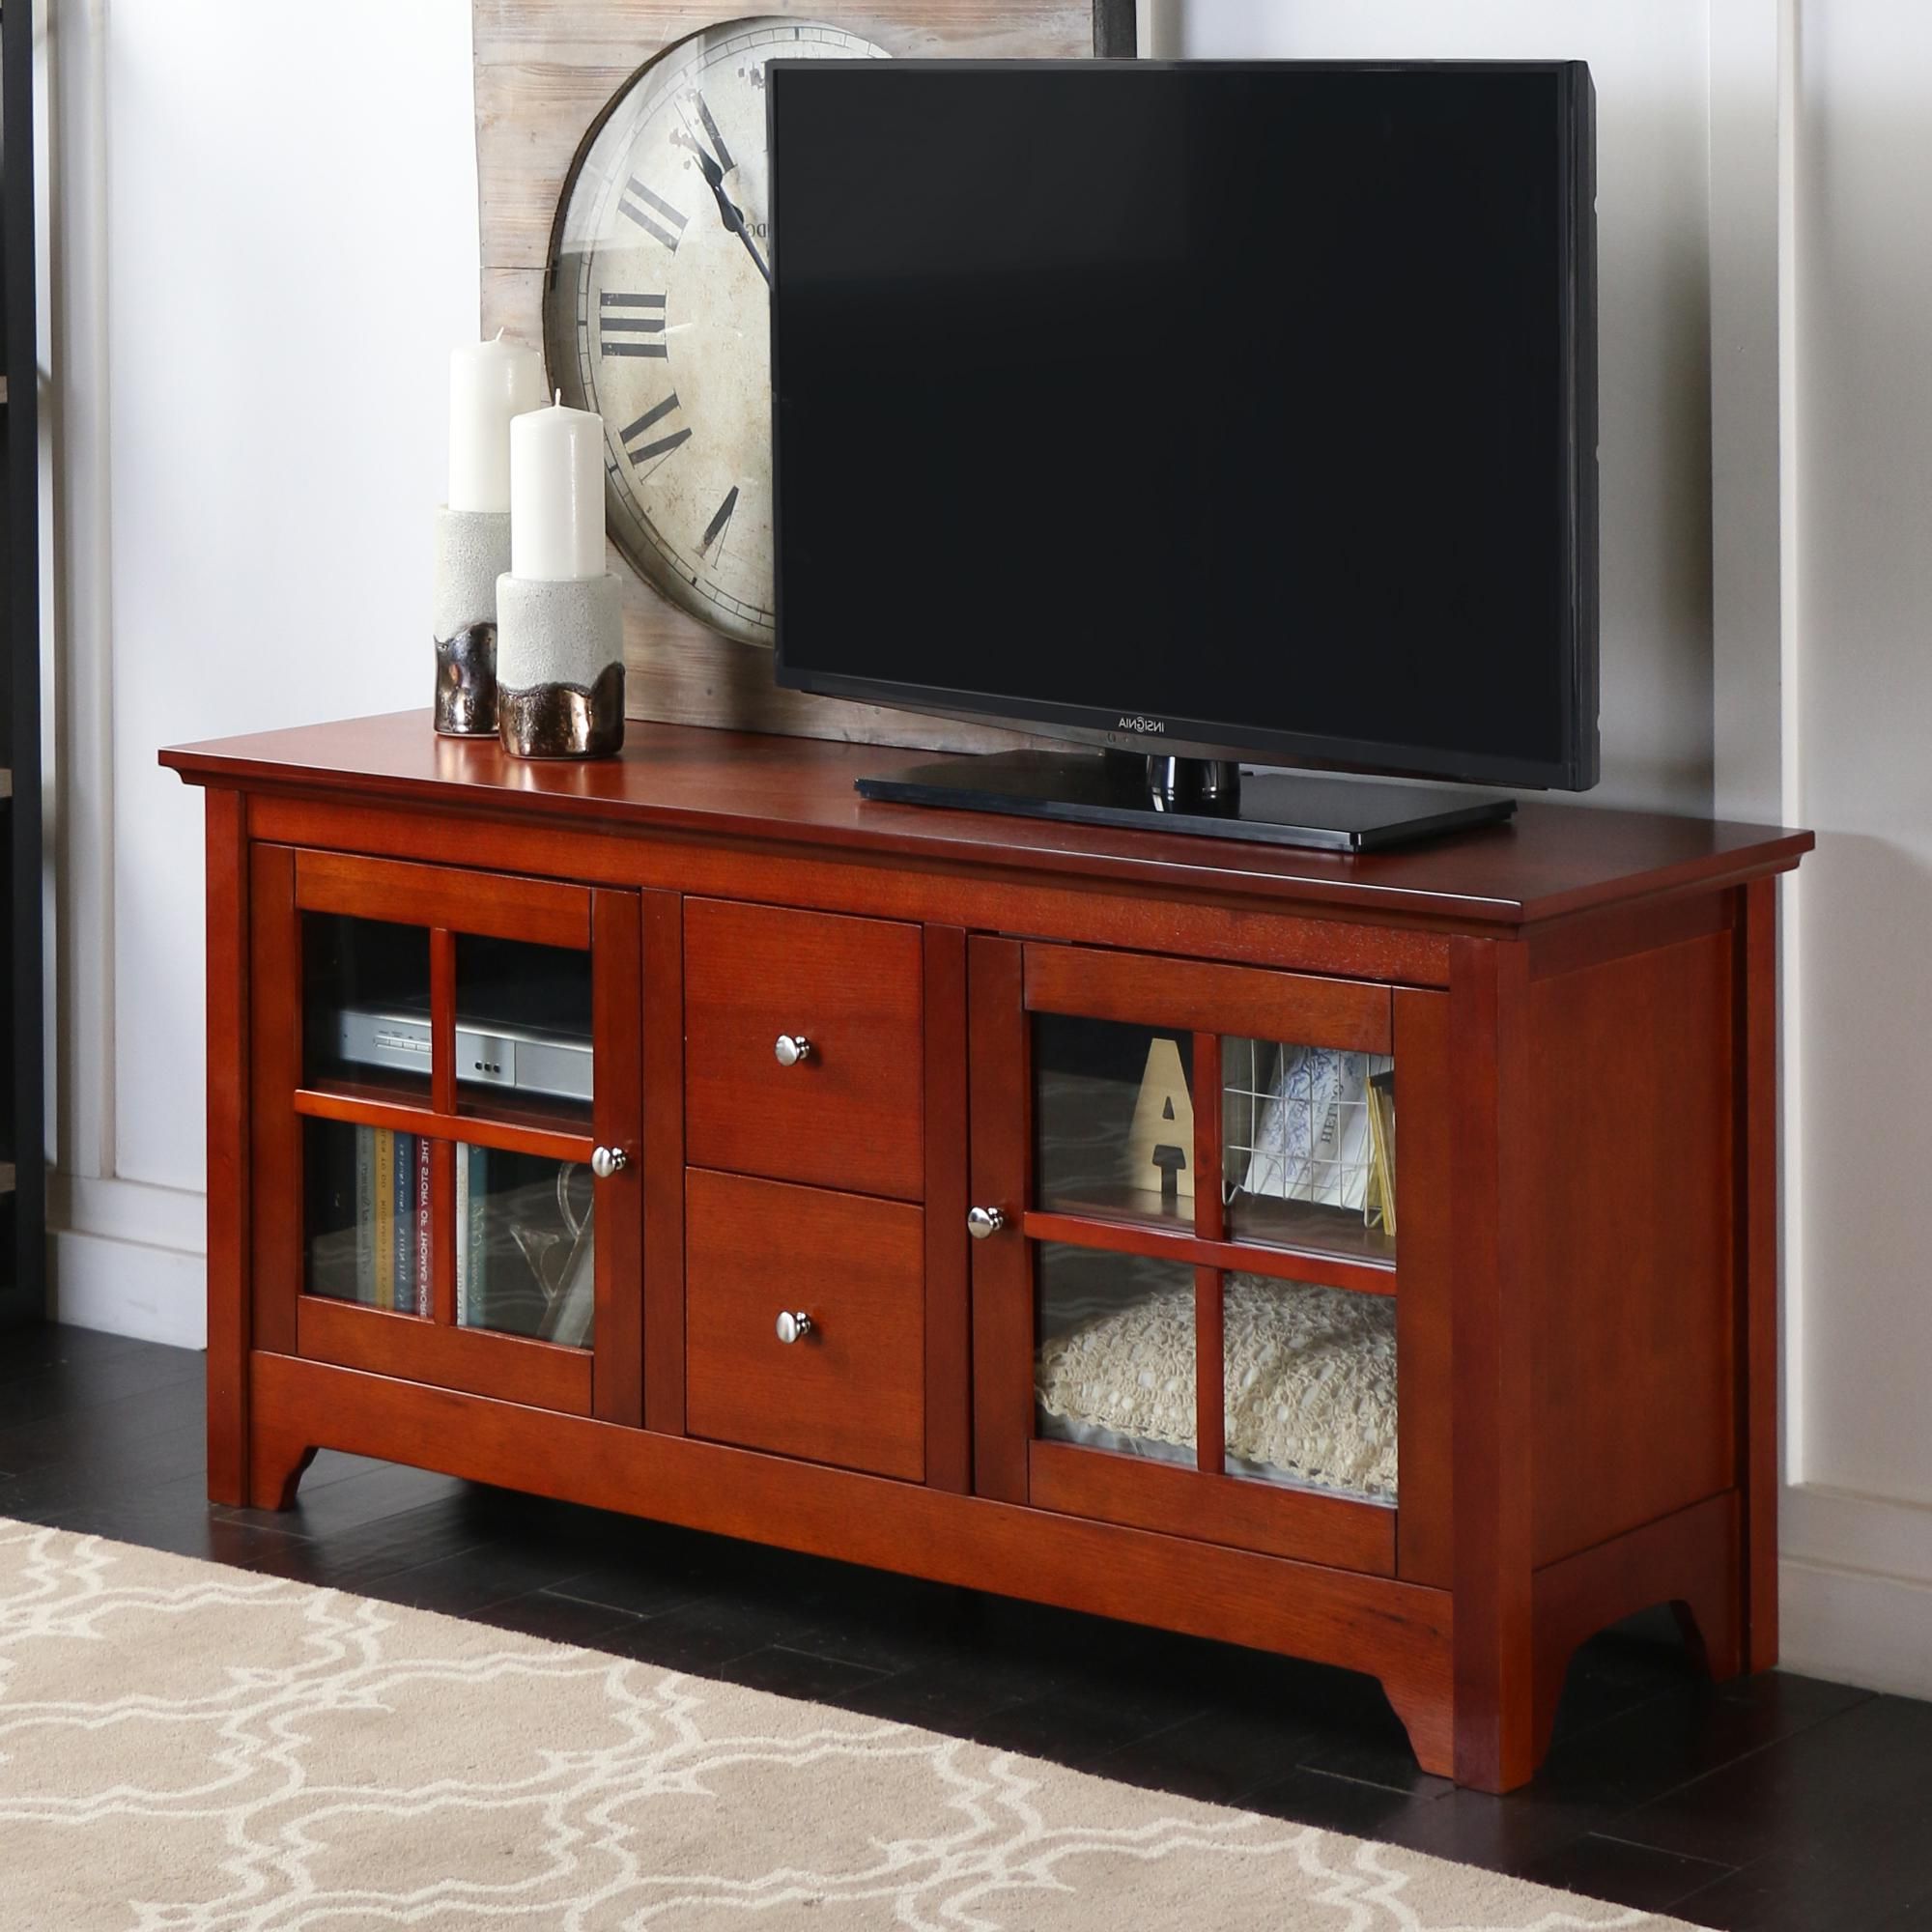 Well Known Wooden Tv Stands With Glass Doors For Amazon: Walker Edison 53" Wood Tv Stand Console With Storage (View 2 of 20)